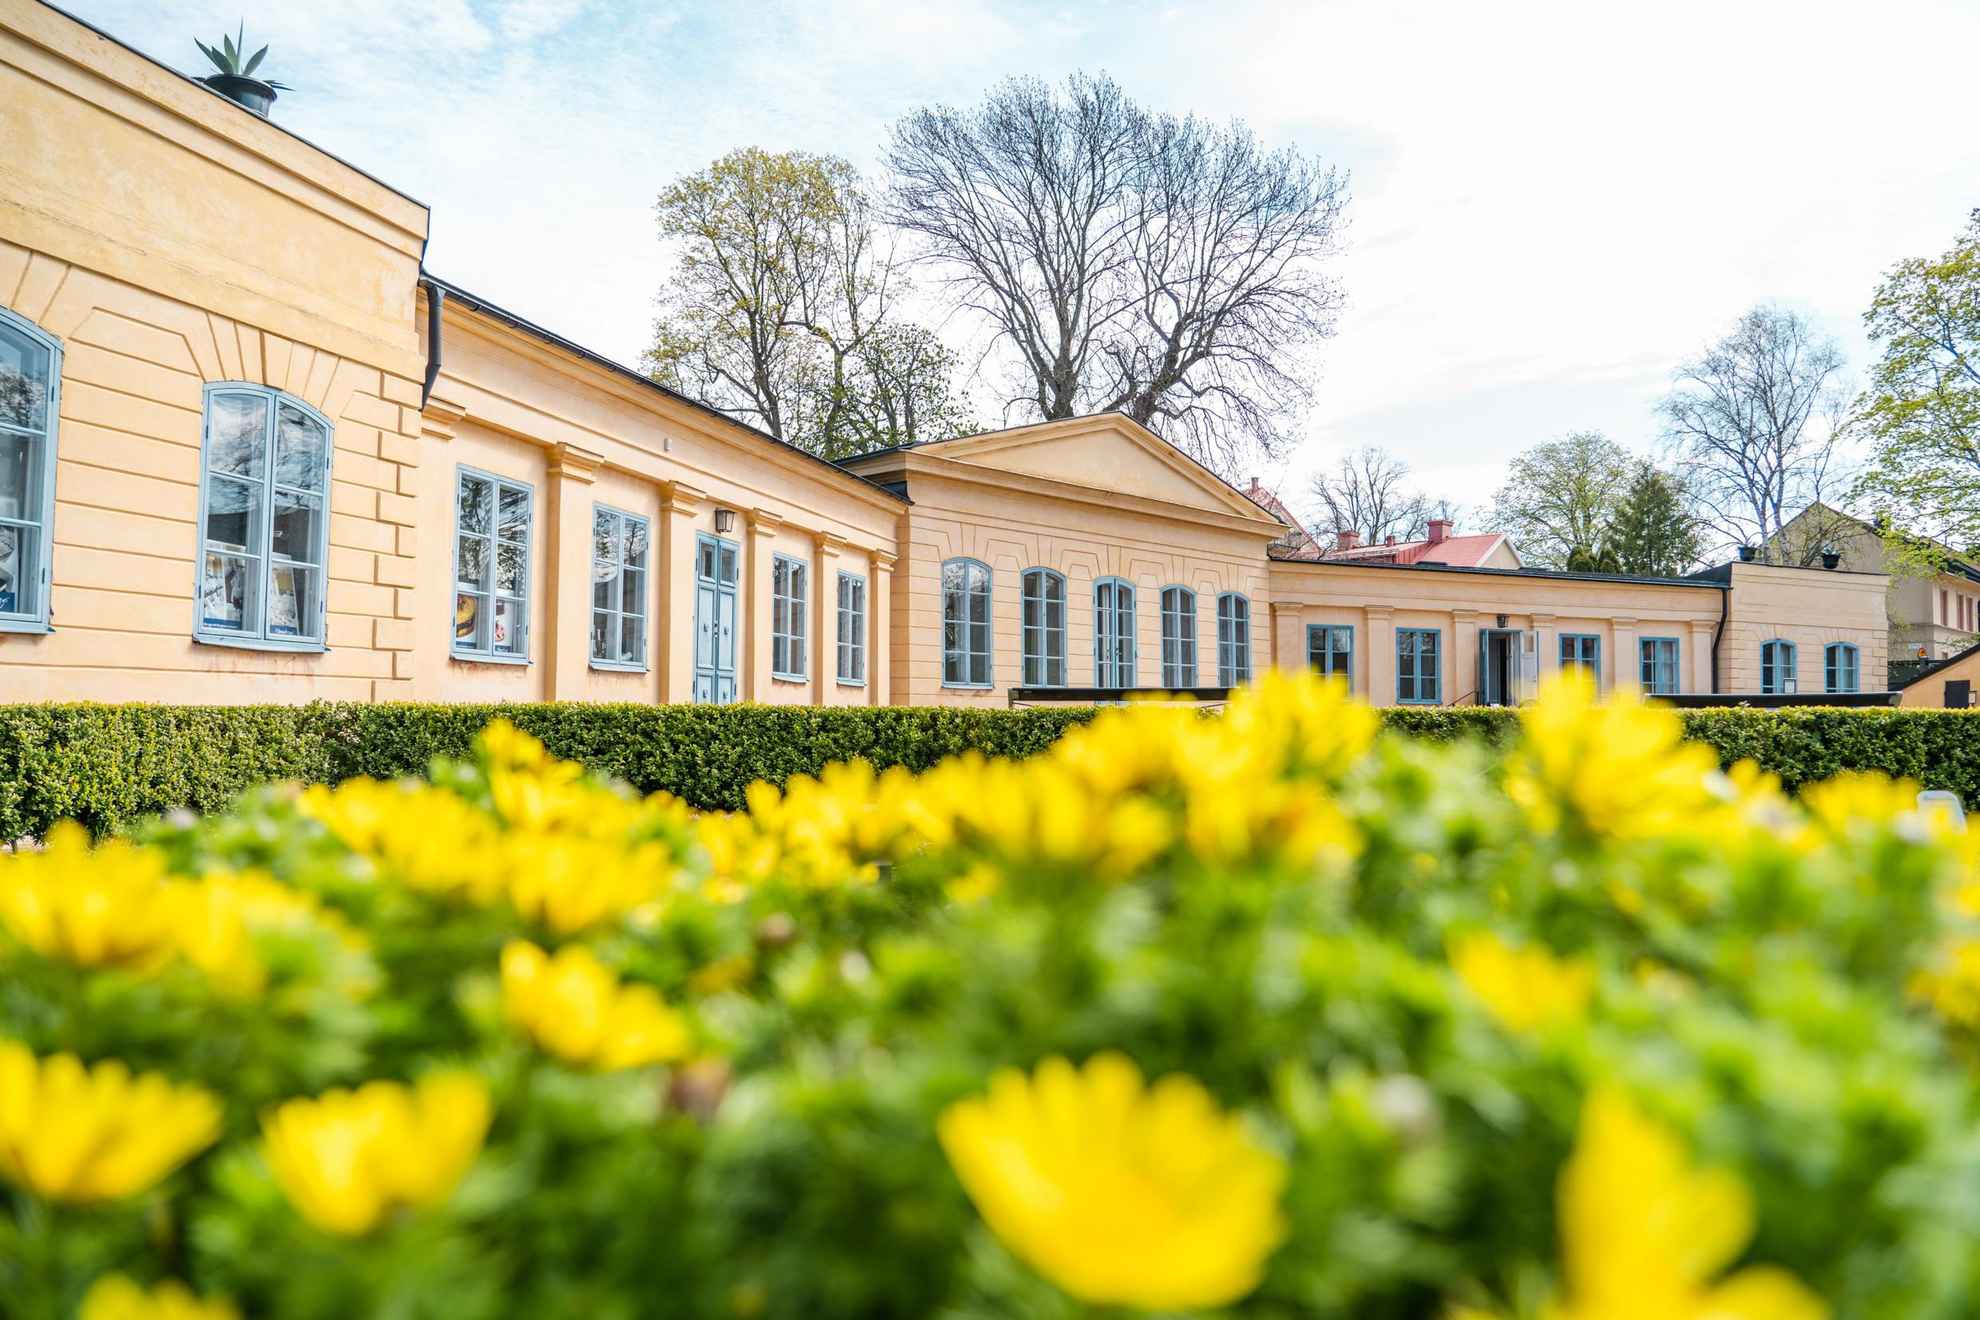 The Linnaeus museum, an old orange stone house, behind a yellow flower bed.